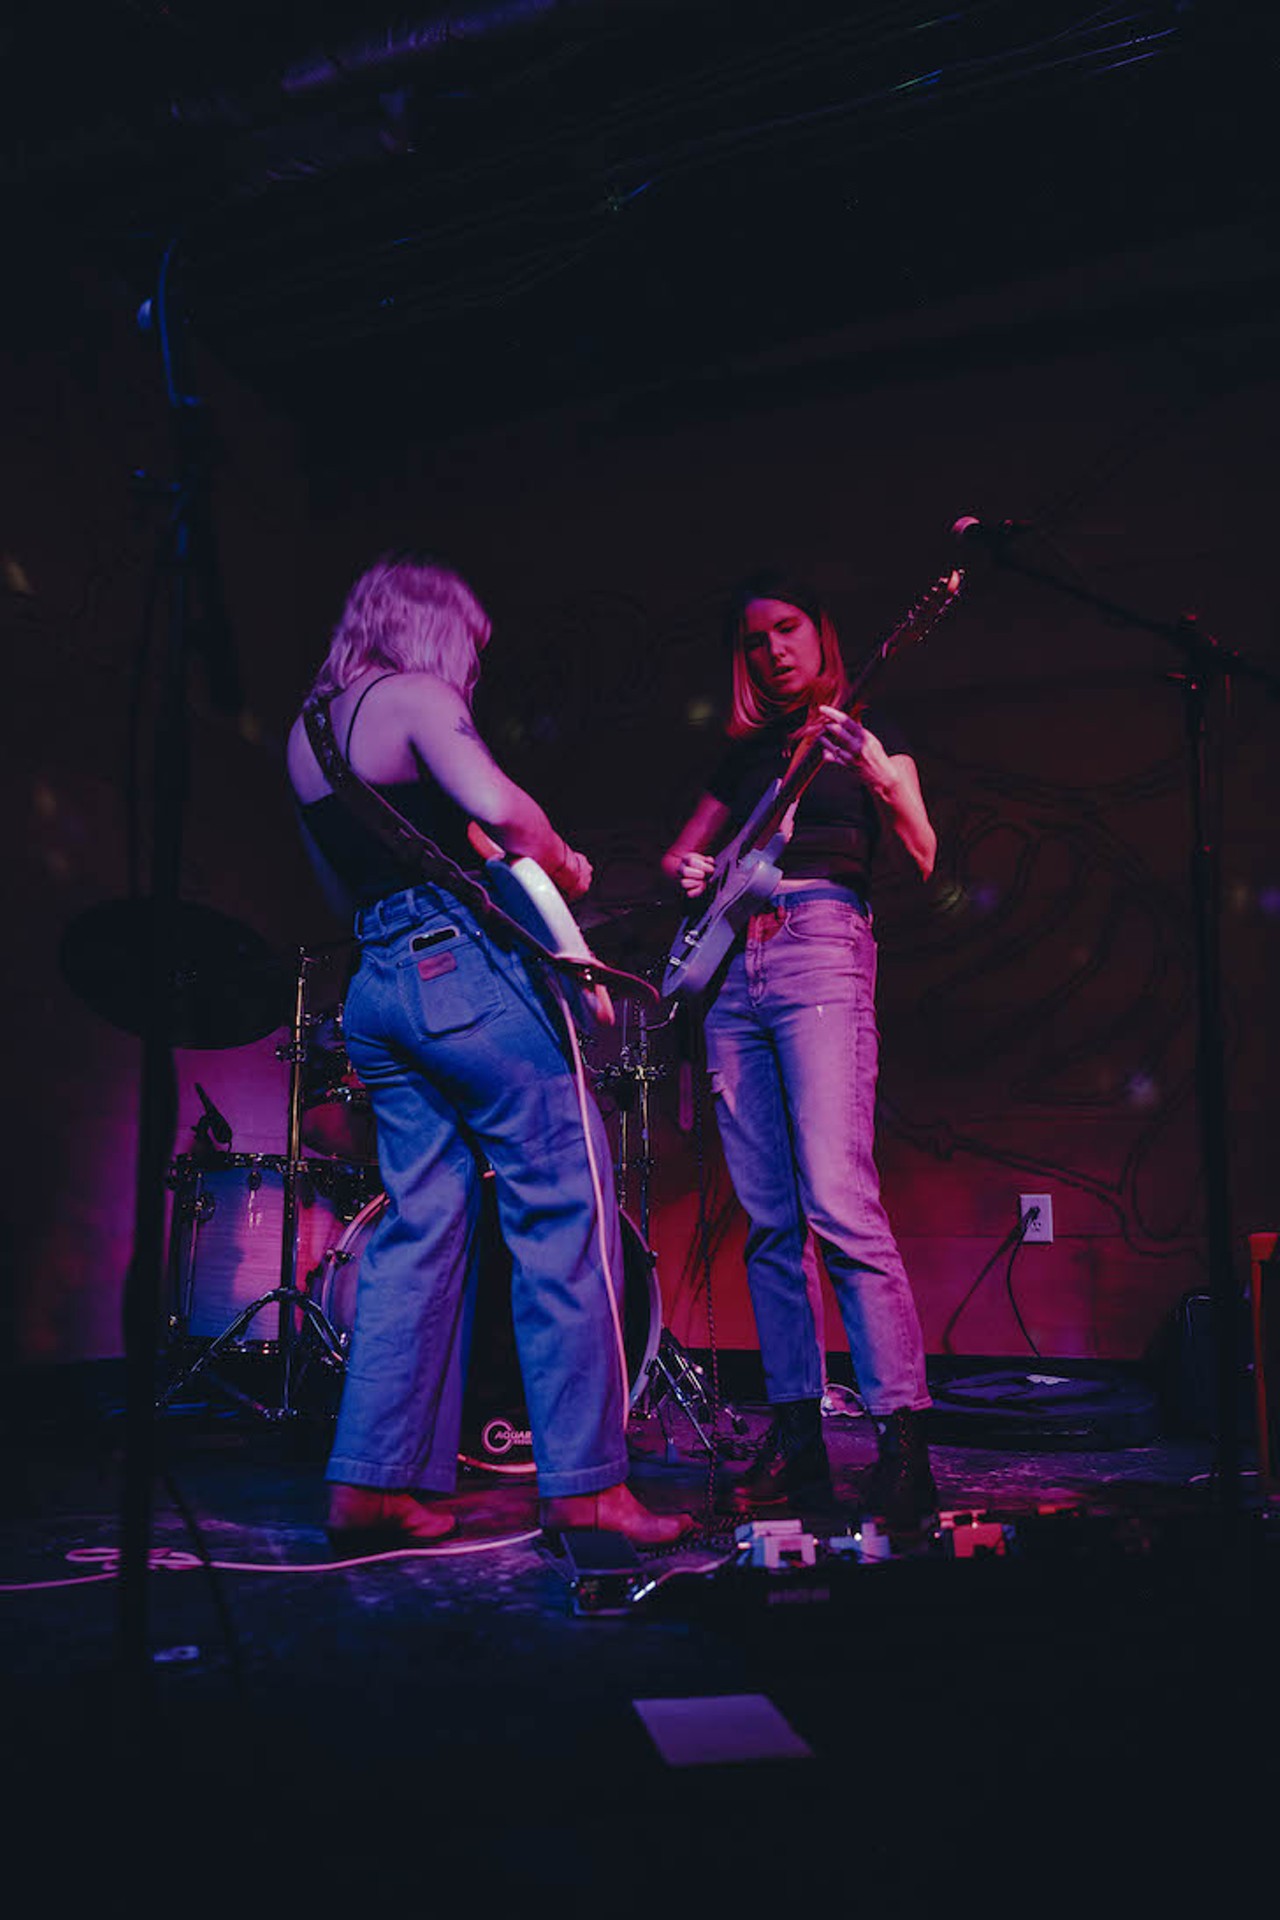 Photos of Sienna Queen and Ken Apperson playing Tampa&#146;s Hooch and Hive